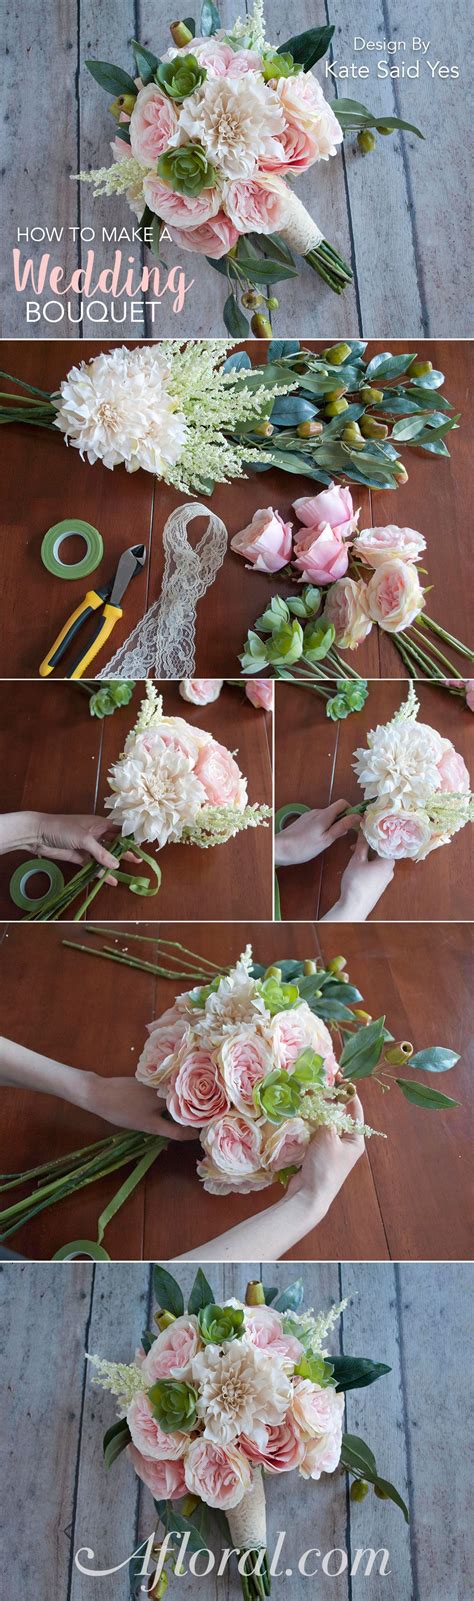 Doing Your Own Wedding Flowers Flowersbout